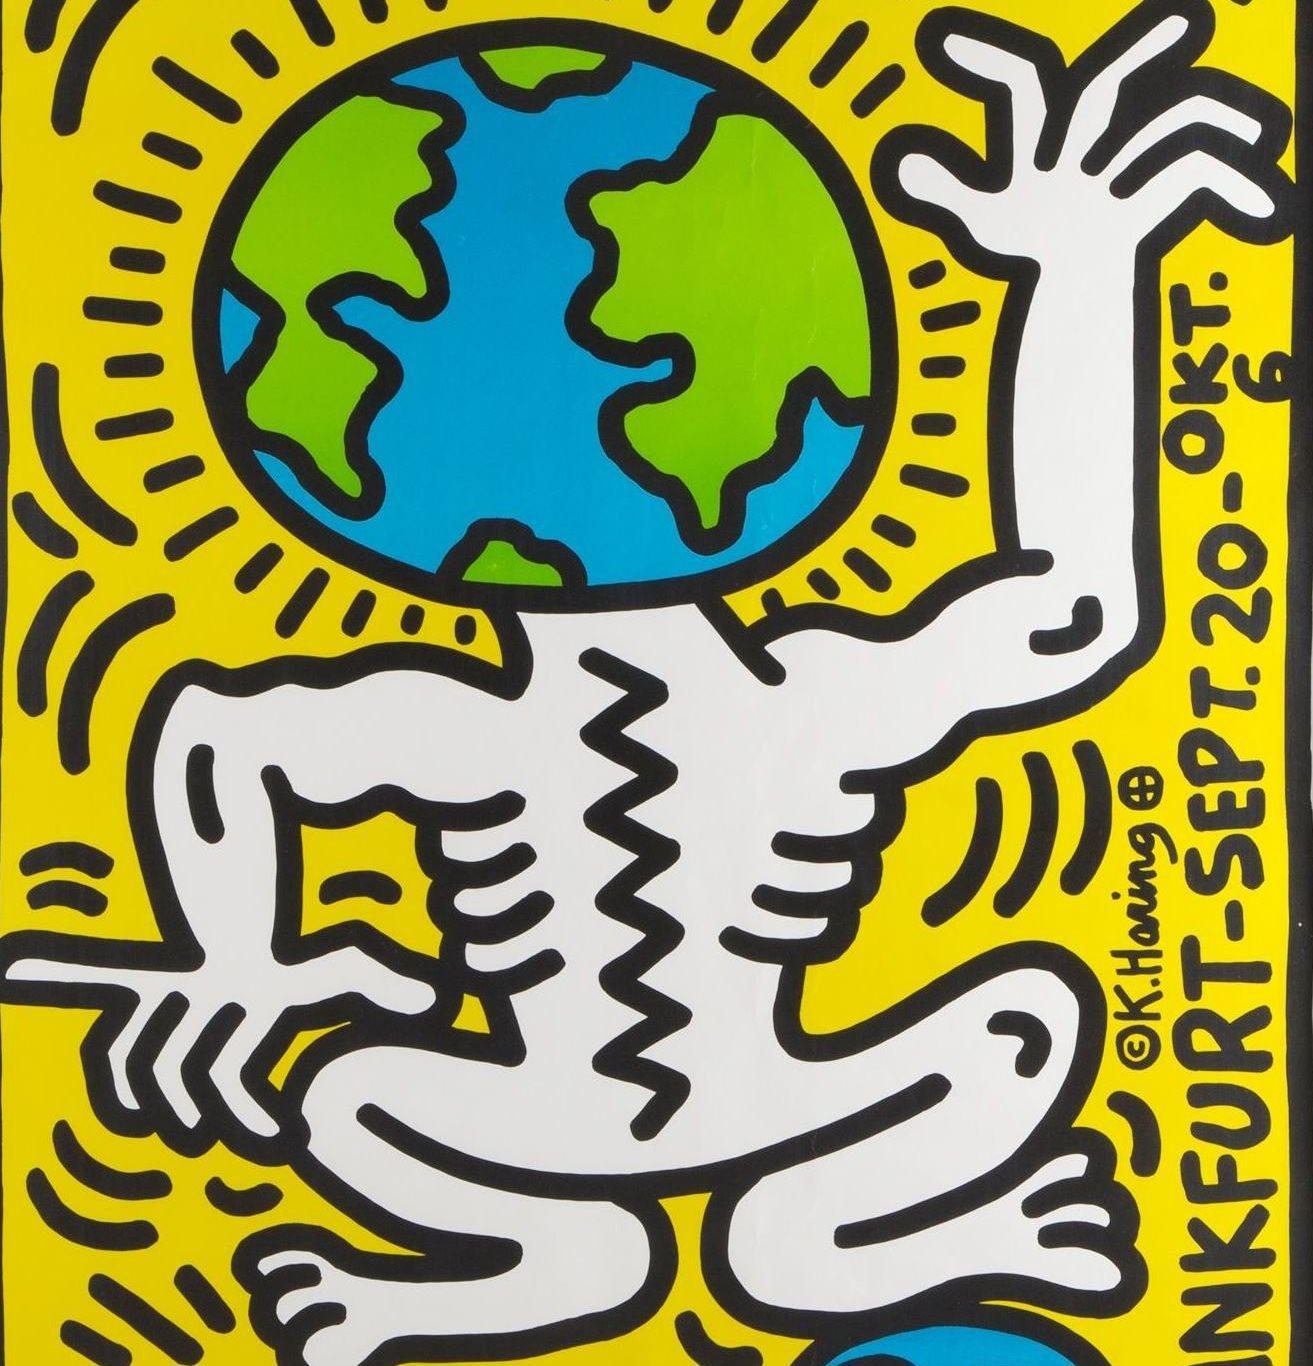 Earth Man (Theater Der Welt, 1985) - screen print - American Modern Print by (after) Keith Haring